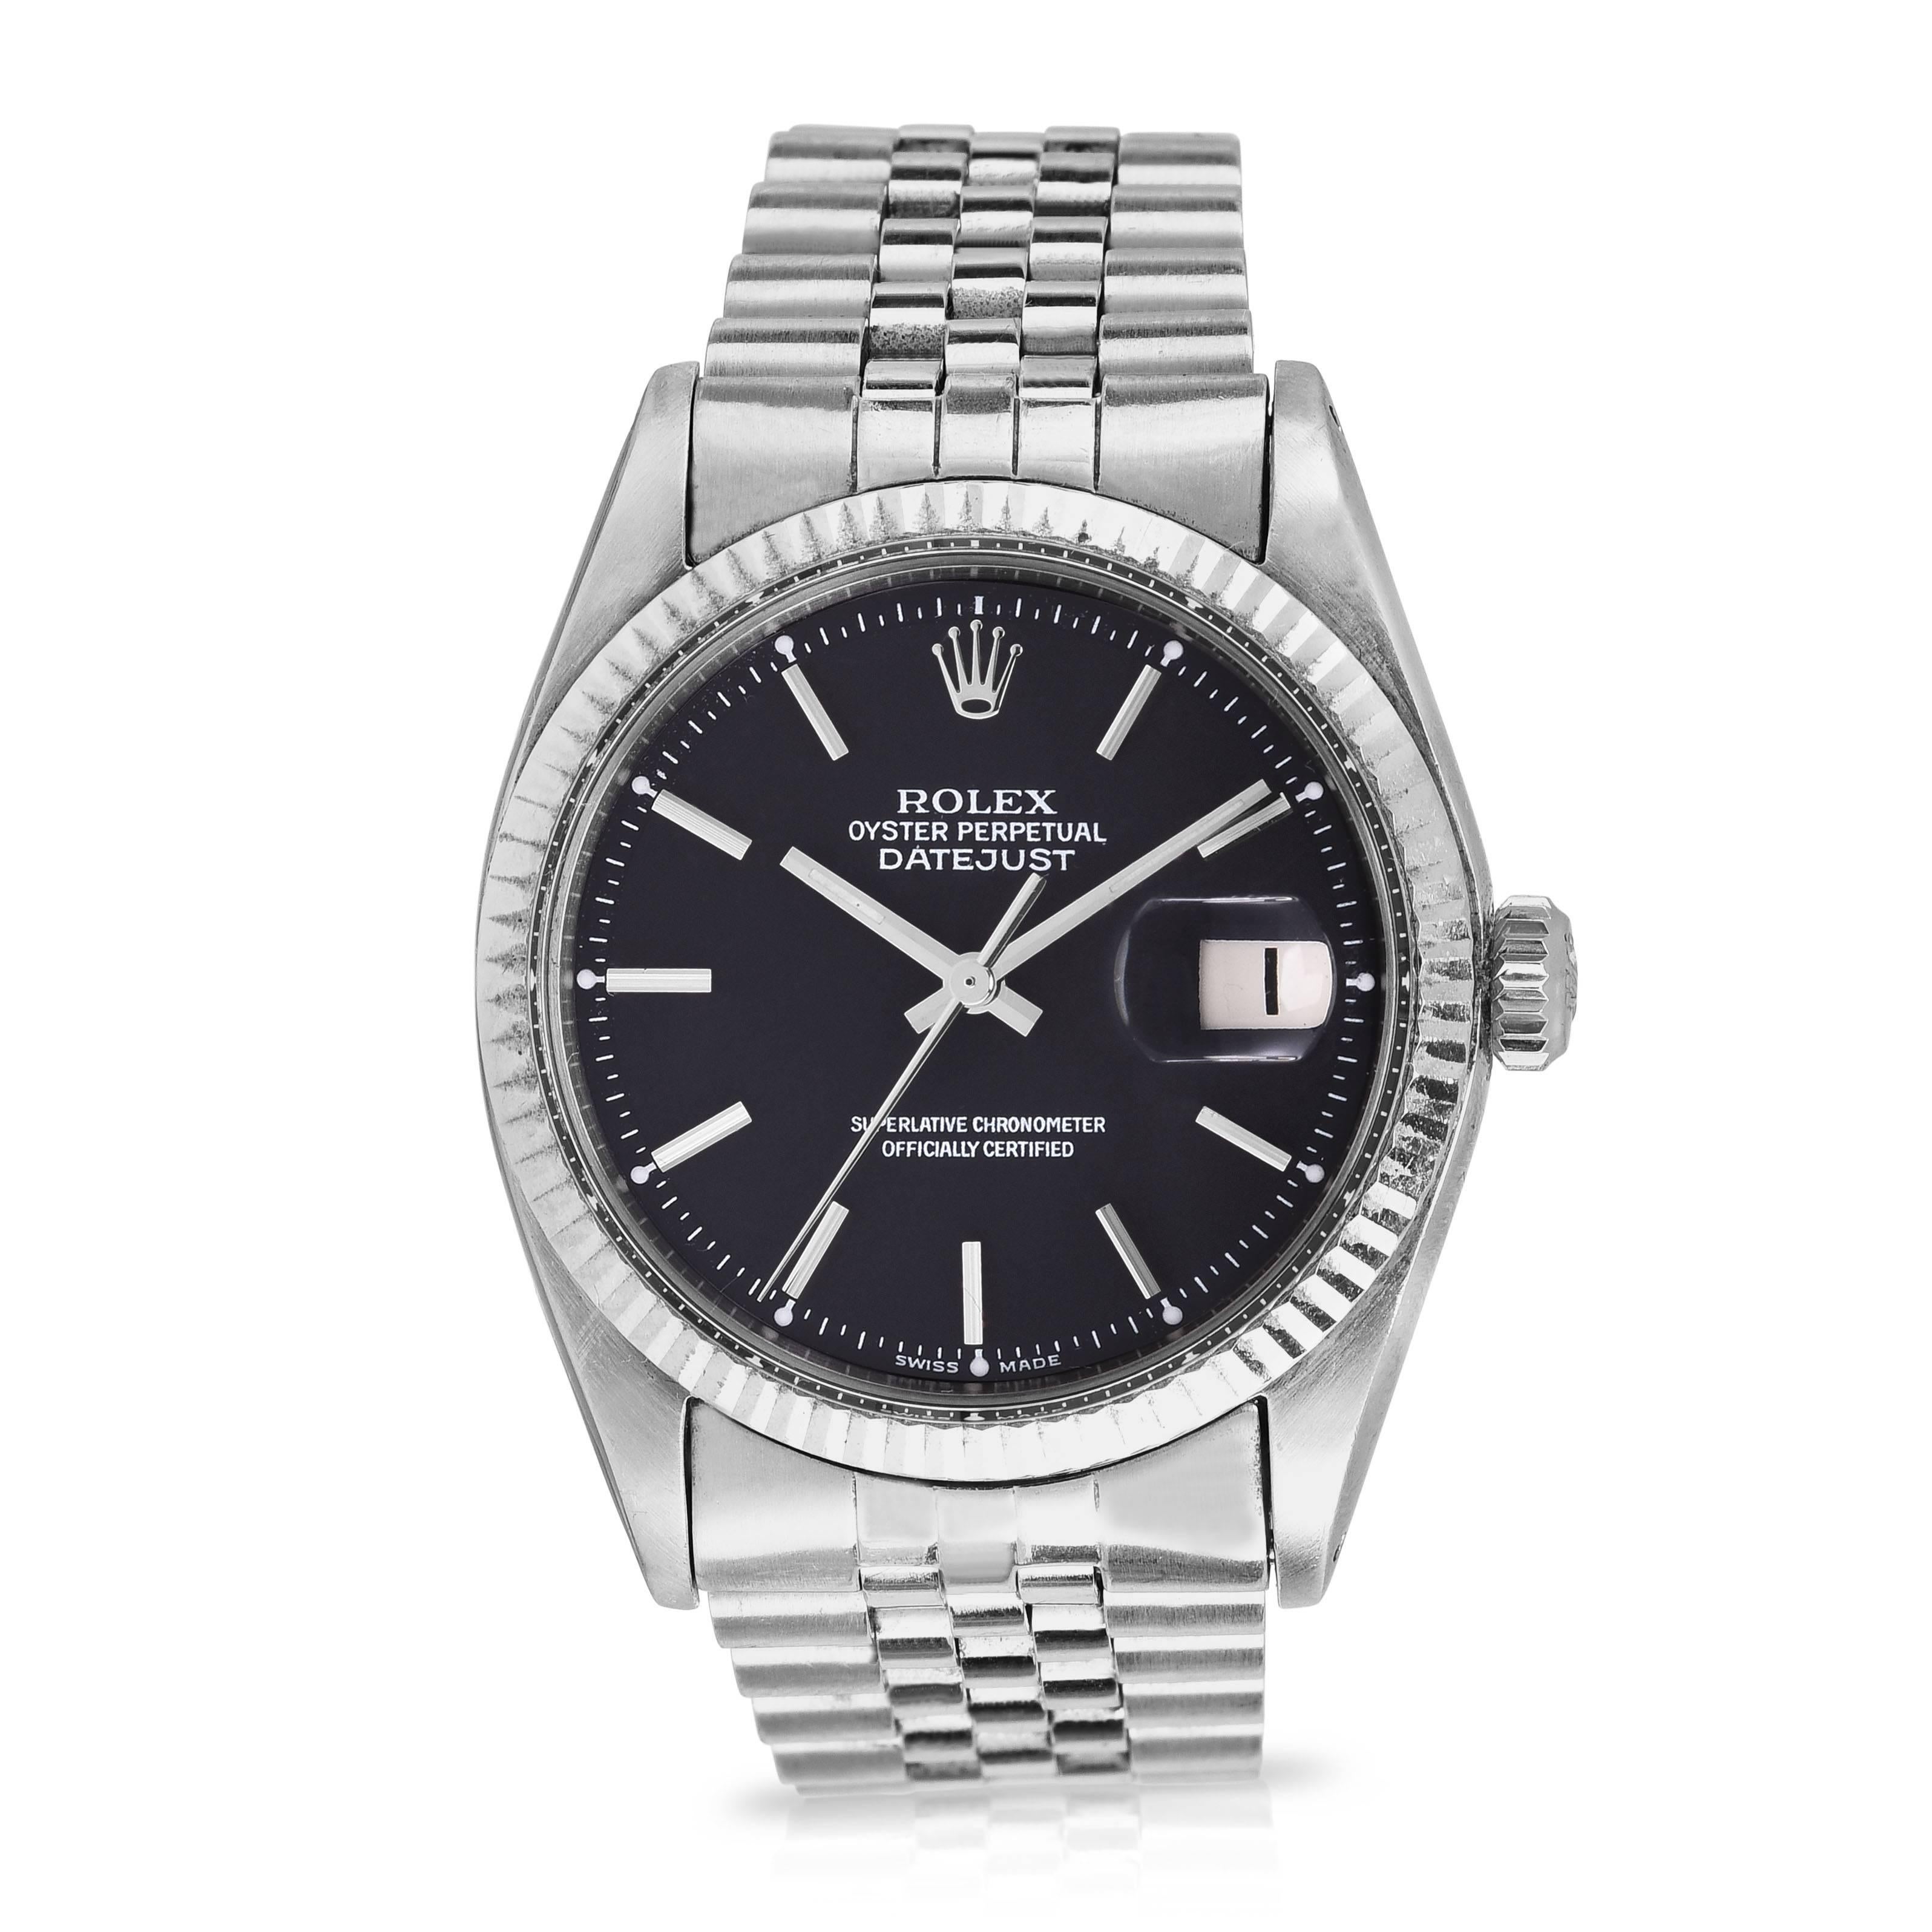 Vintage Rolex Oyster Perpetual Datejust
Factory Black Matte Dial with Silver Applied Stick Markers
18K White Gold Fluted Bezel
36mm in size
Acrylic Crystal
Date Function
1968 Production
Comes Fitted on a Vintage Rolex Stainless Steel Jubilee